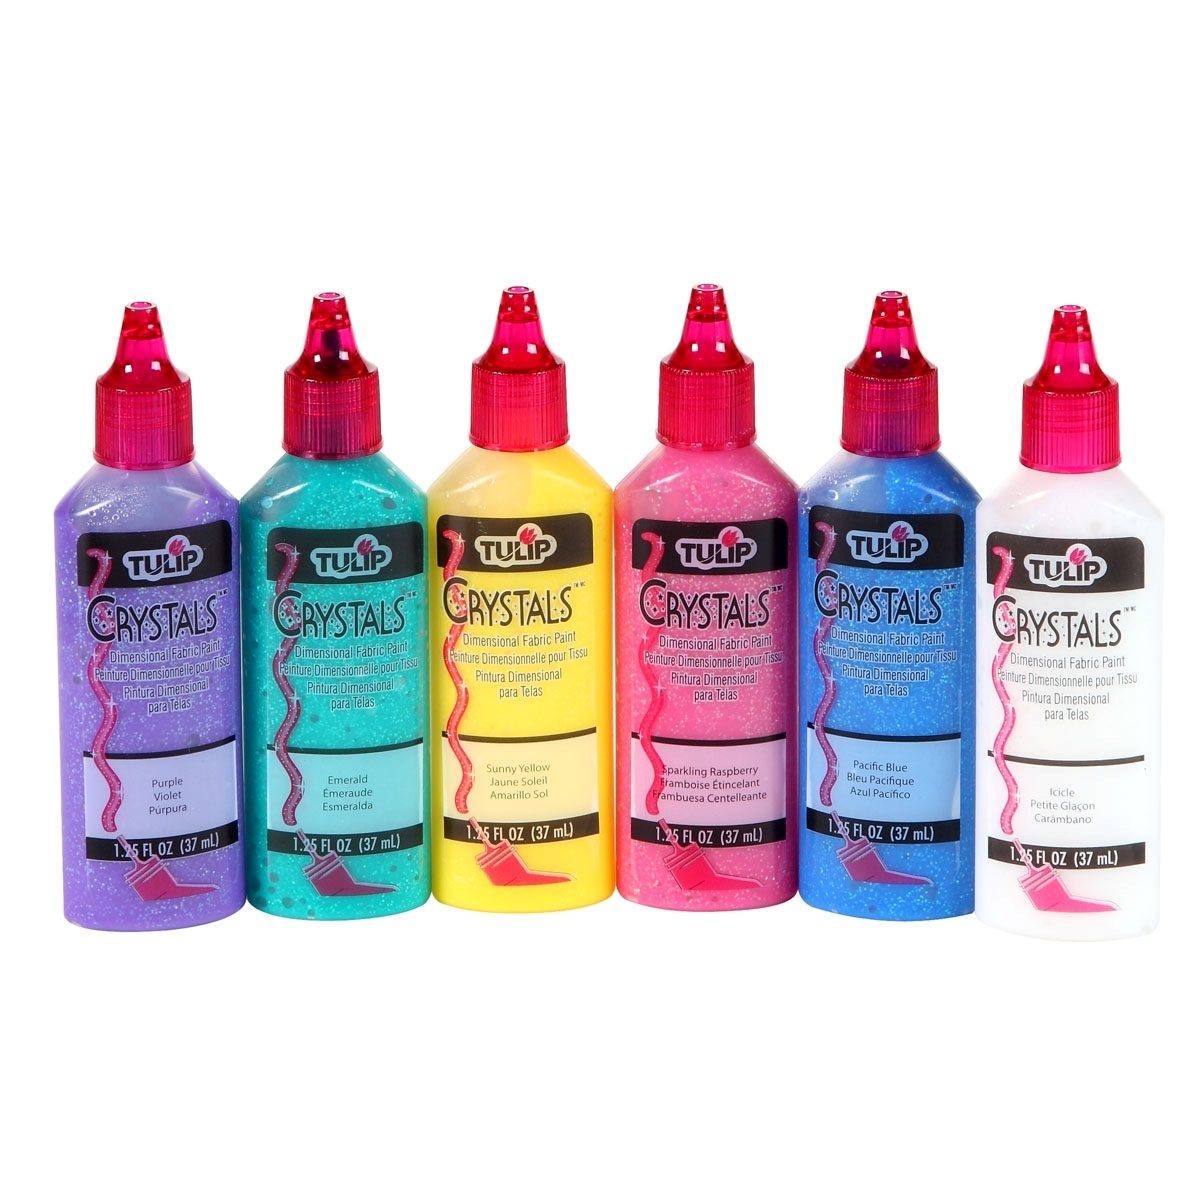 Dimensional Fabric Paint Tulip Crystals 6 Pack colours